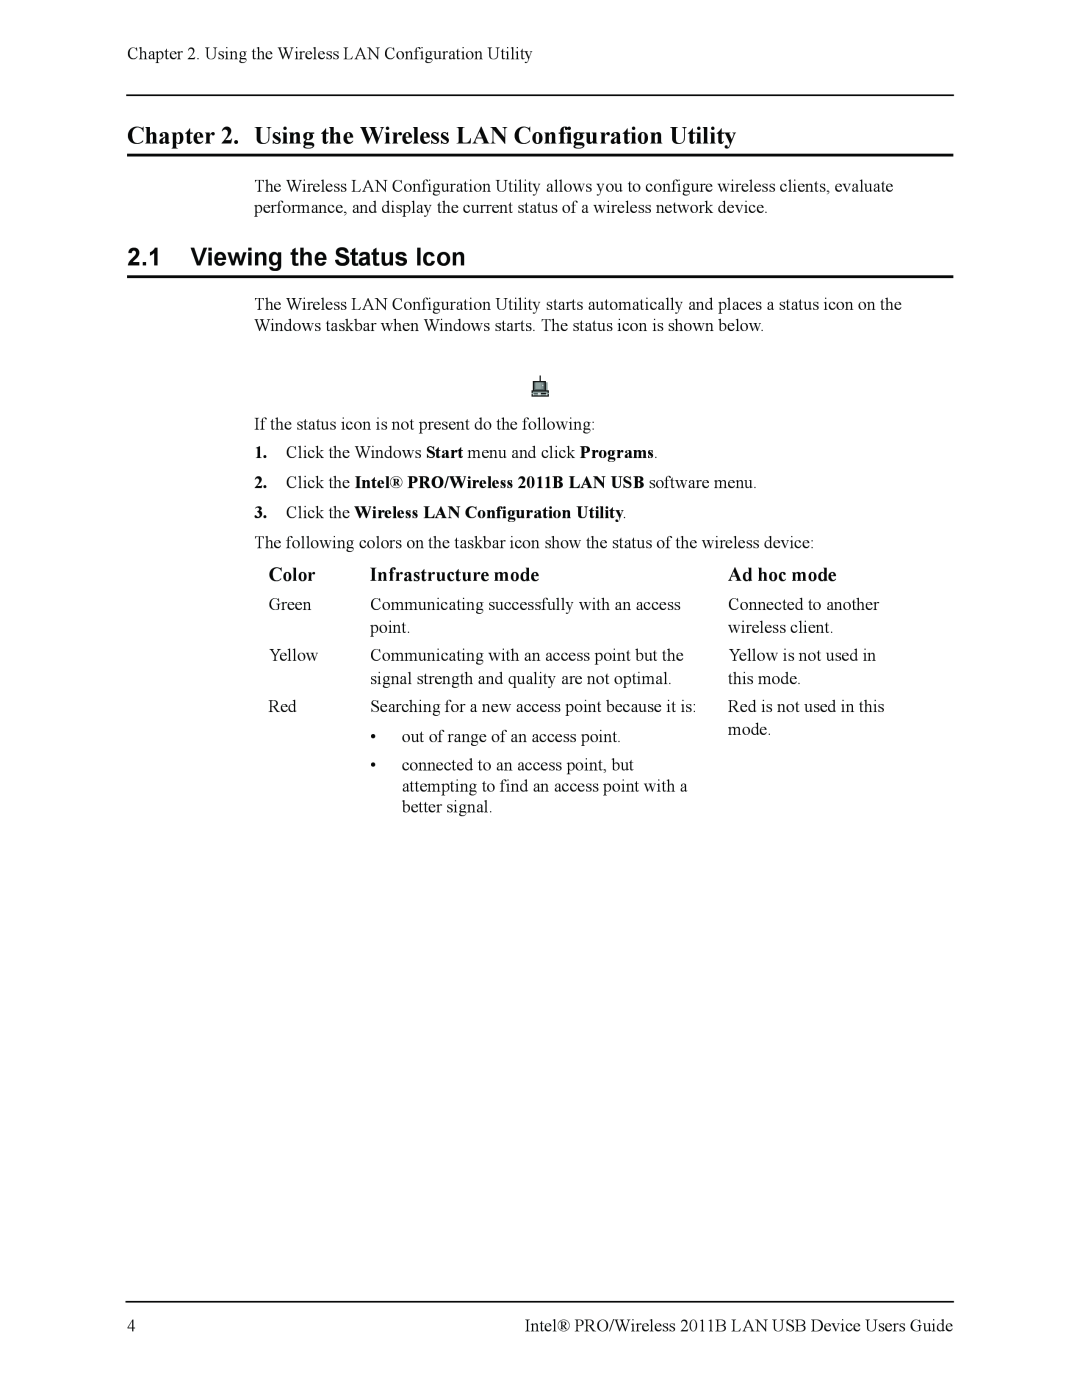 Intel 2011B manual 2.1Viewing the Status Icon, Color, Infrastructure mode, Ad hoc mode 